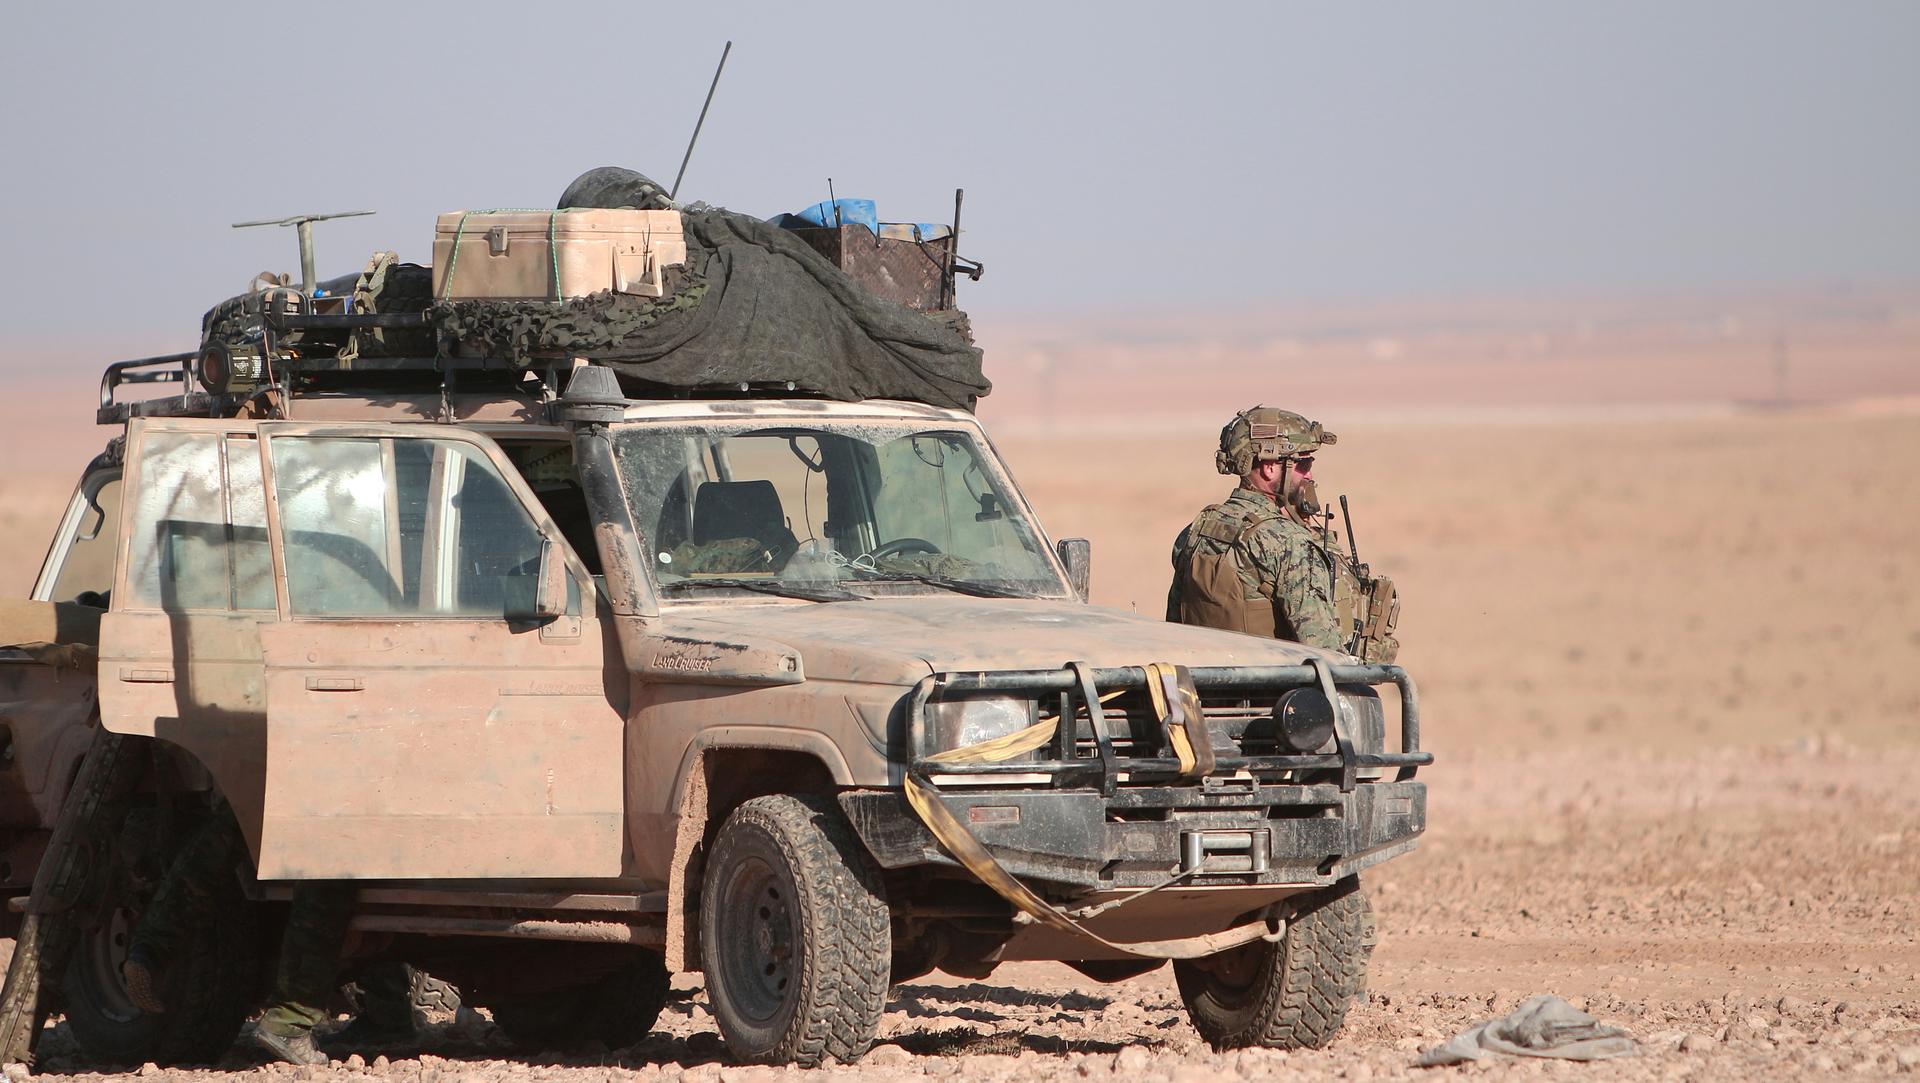 A US armed forces member stands near a military vehicle, north of Raqqa, Syria on Nov. 6.